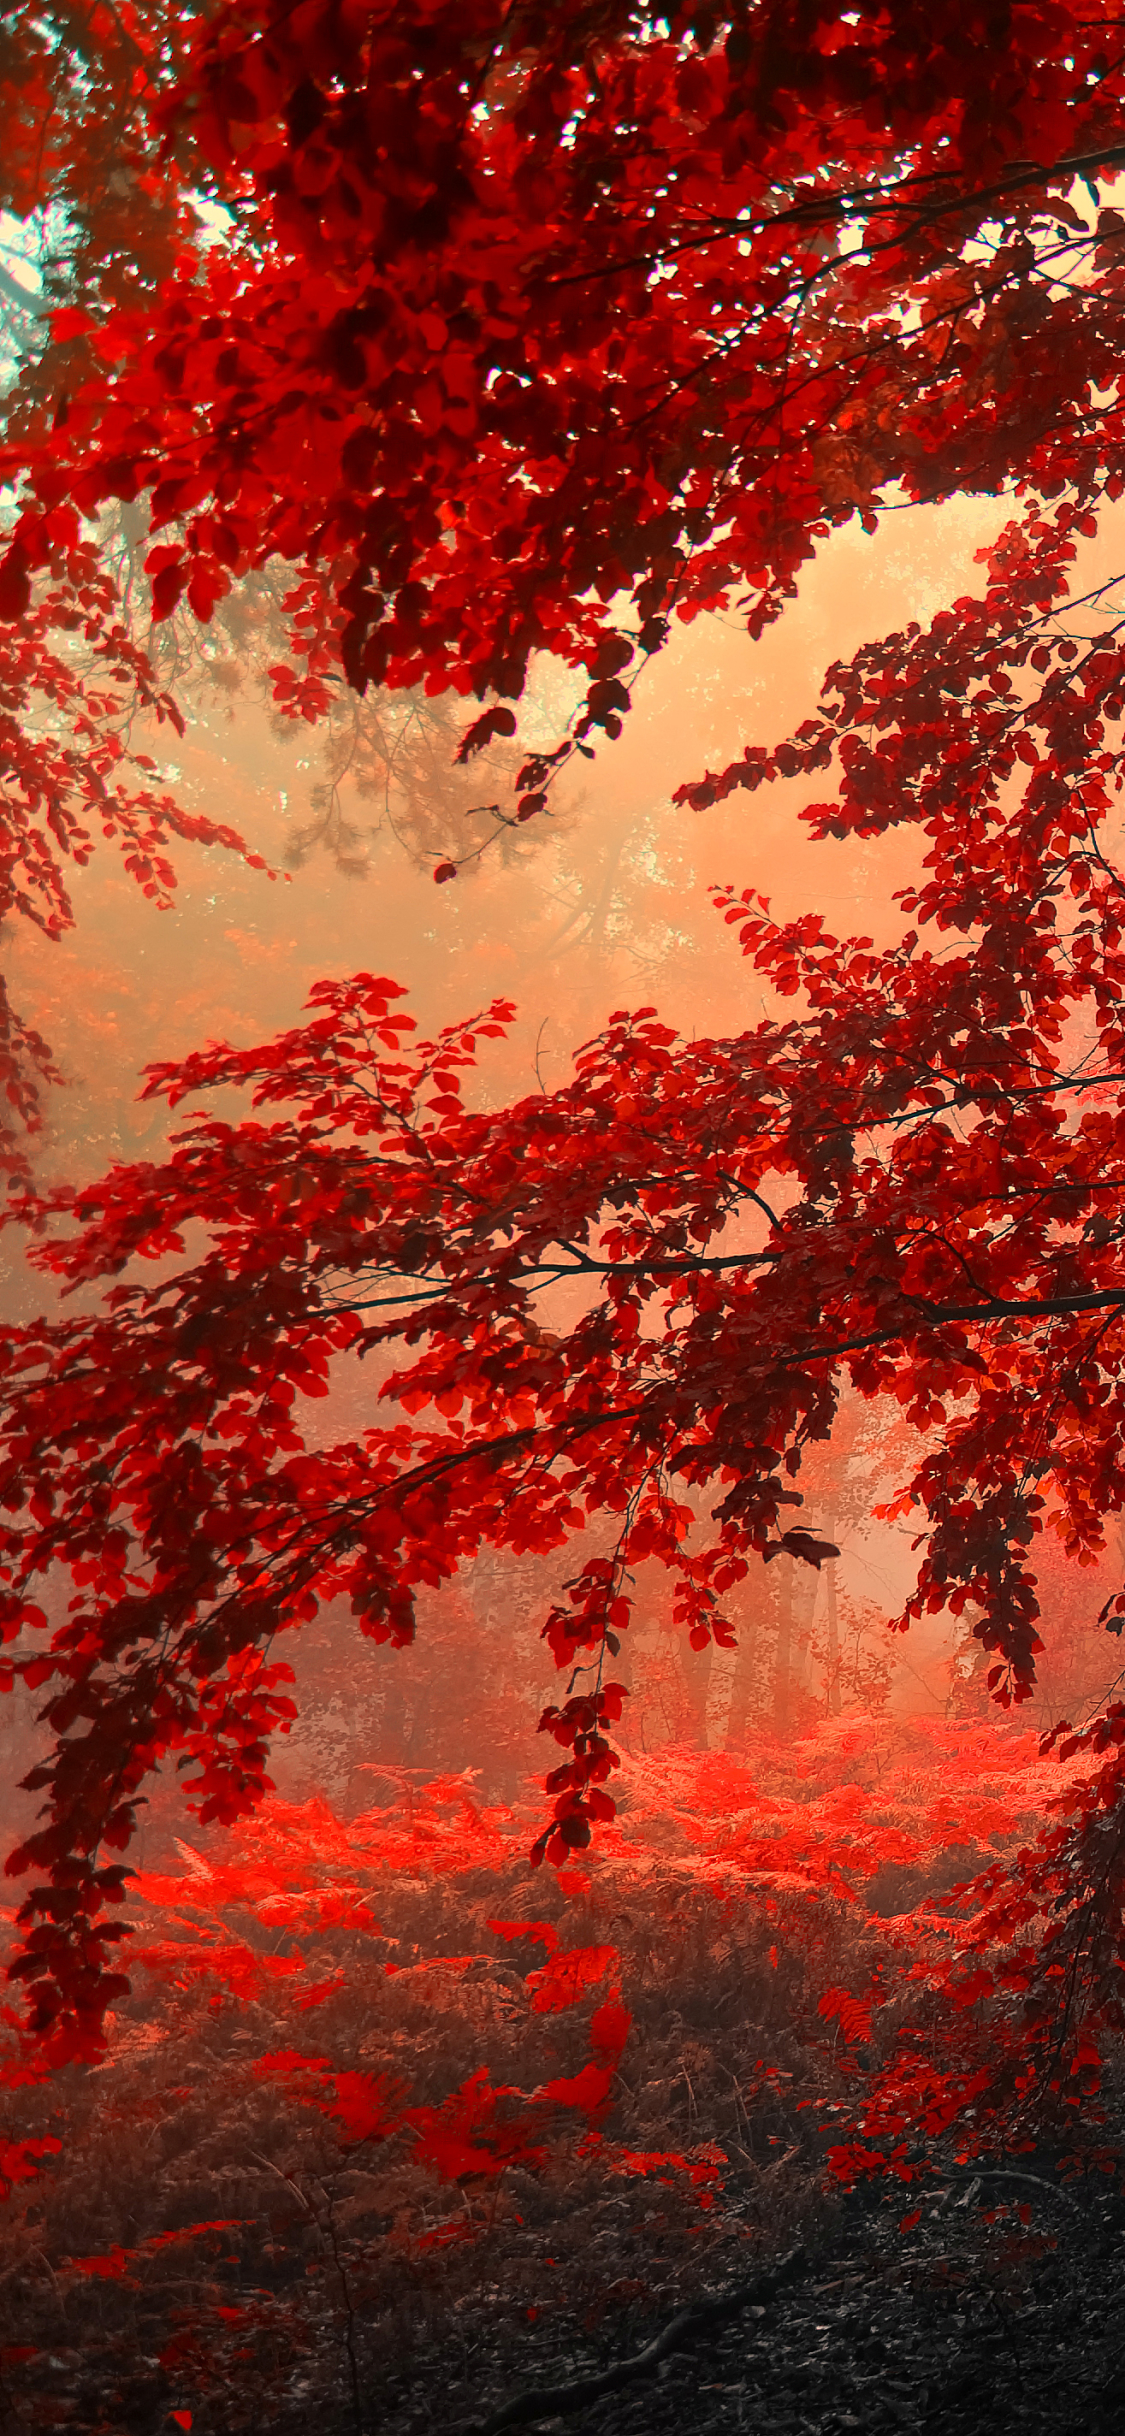 The red tree  Fantasy  Abstract Background Wallpapers on Desktop Nexus  Image 2581632